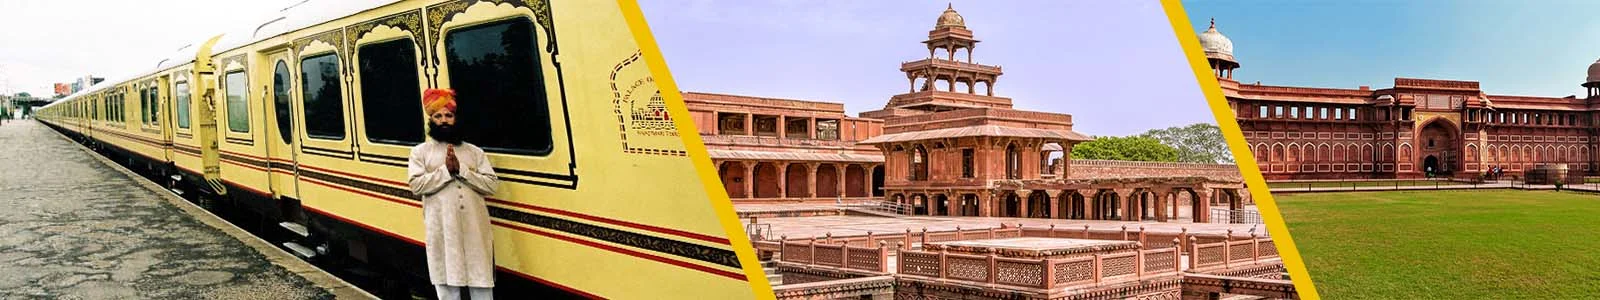 Same Day Agra Tour by Luxury Train from Delhi